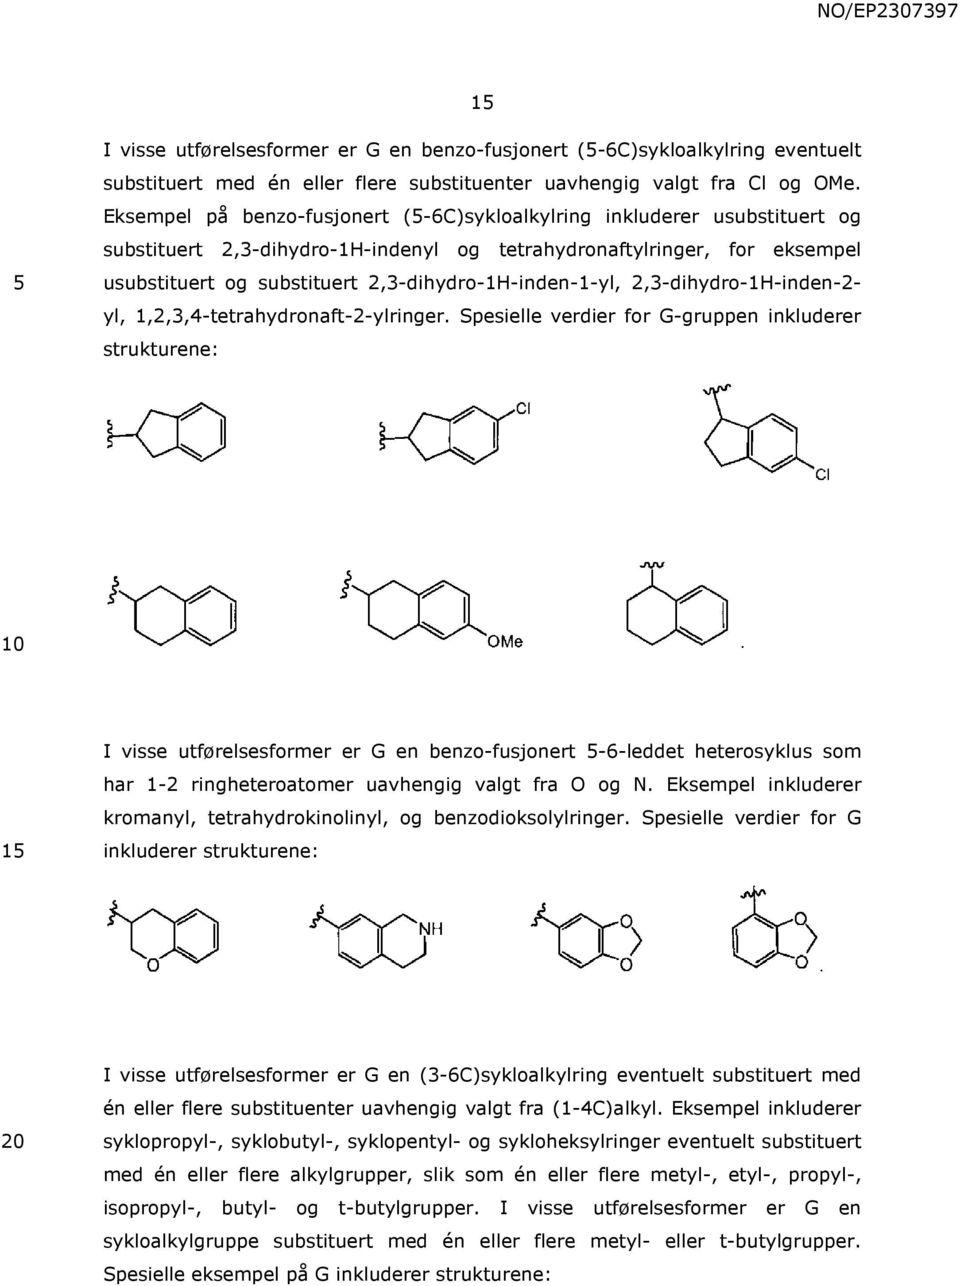 2,3-dihydro-1H-inden-1-yl, 2,3-dihydro-1H-inden-2- yl, 1,2,3,4-tetrahydronaft-2-ylringer.